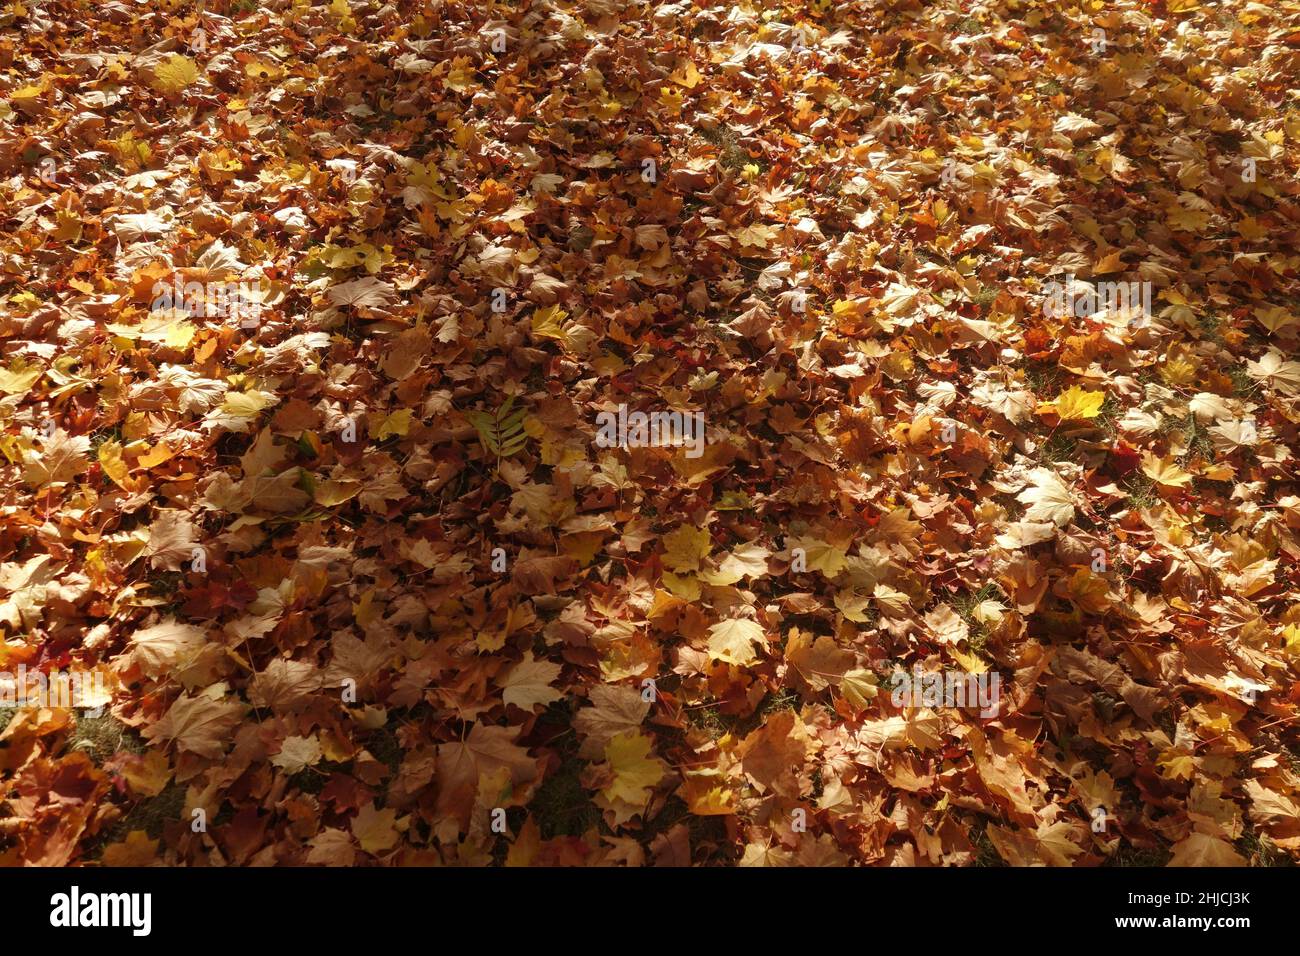 background of fallen leaf in autumnal colors Stock Photo